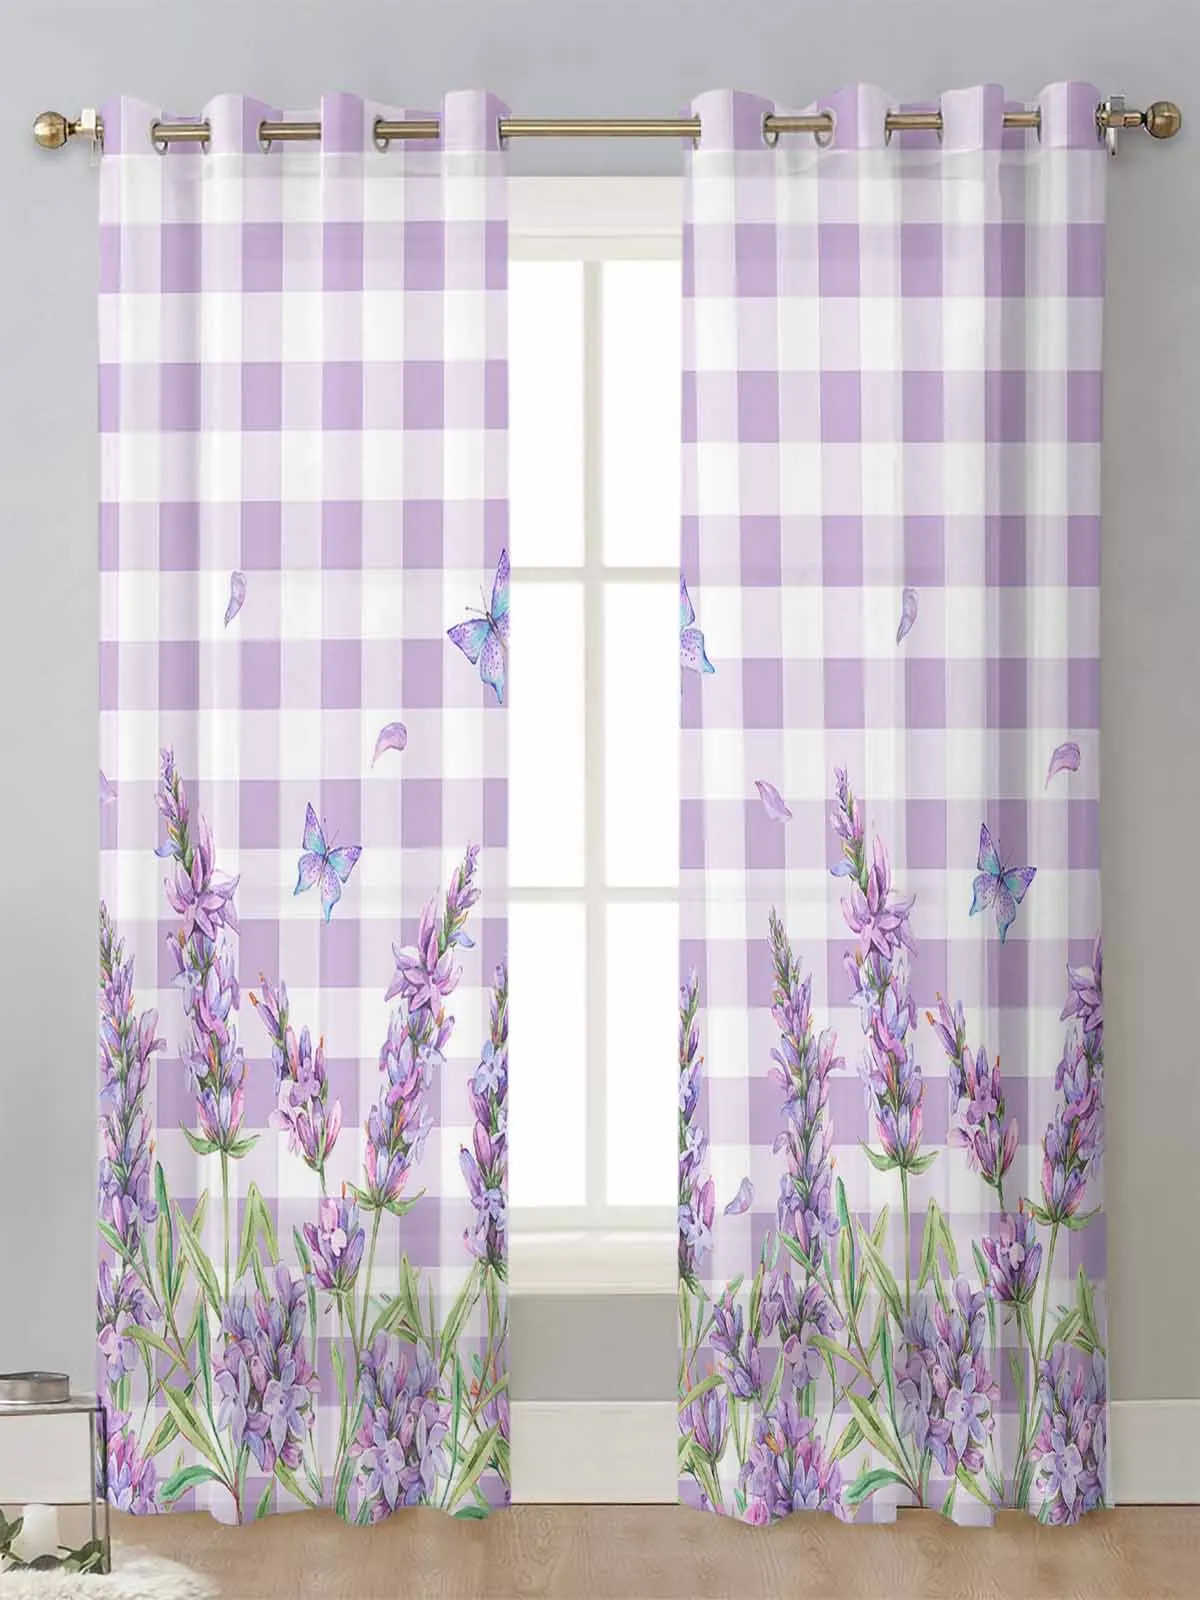 

Purple Lavender Flower Butterfly Purple Plaid Sheer Curtains Living Room Window Voile Tulle Curtain Cortinas Drapes Home Decor